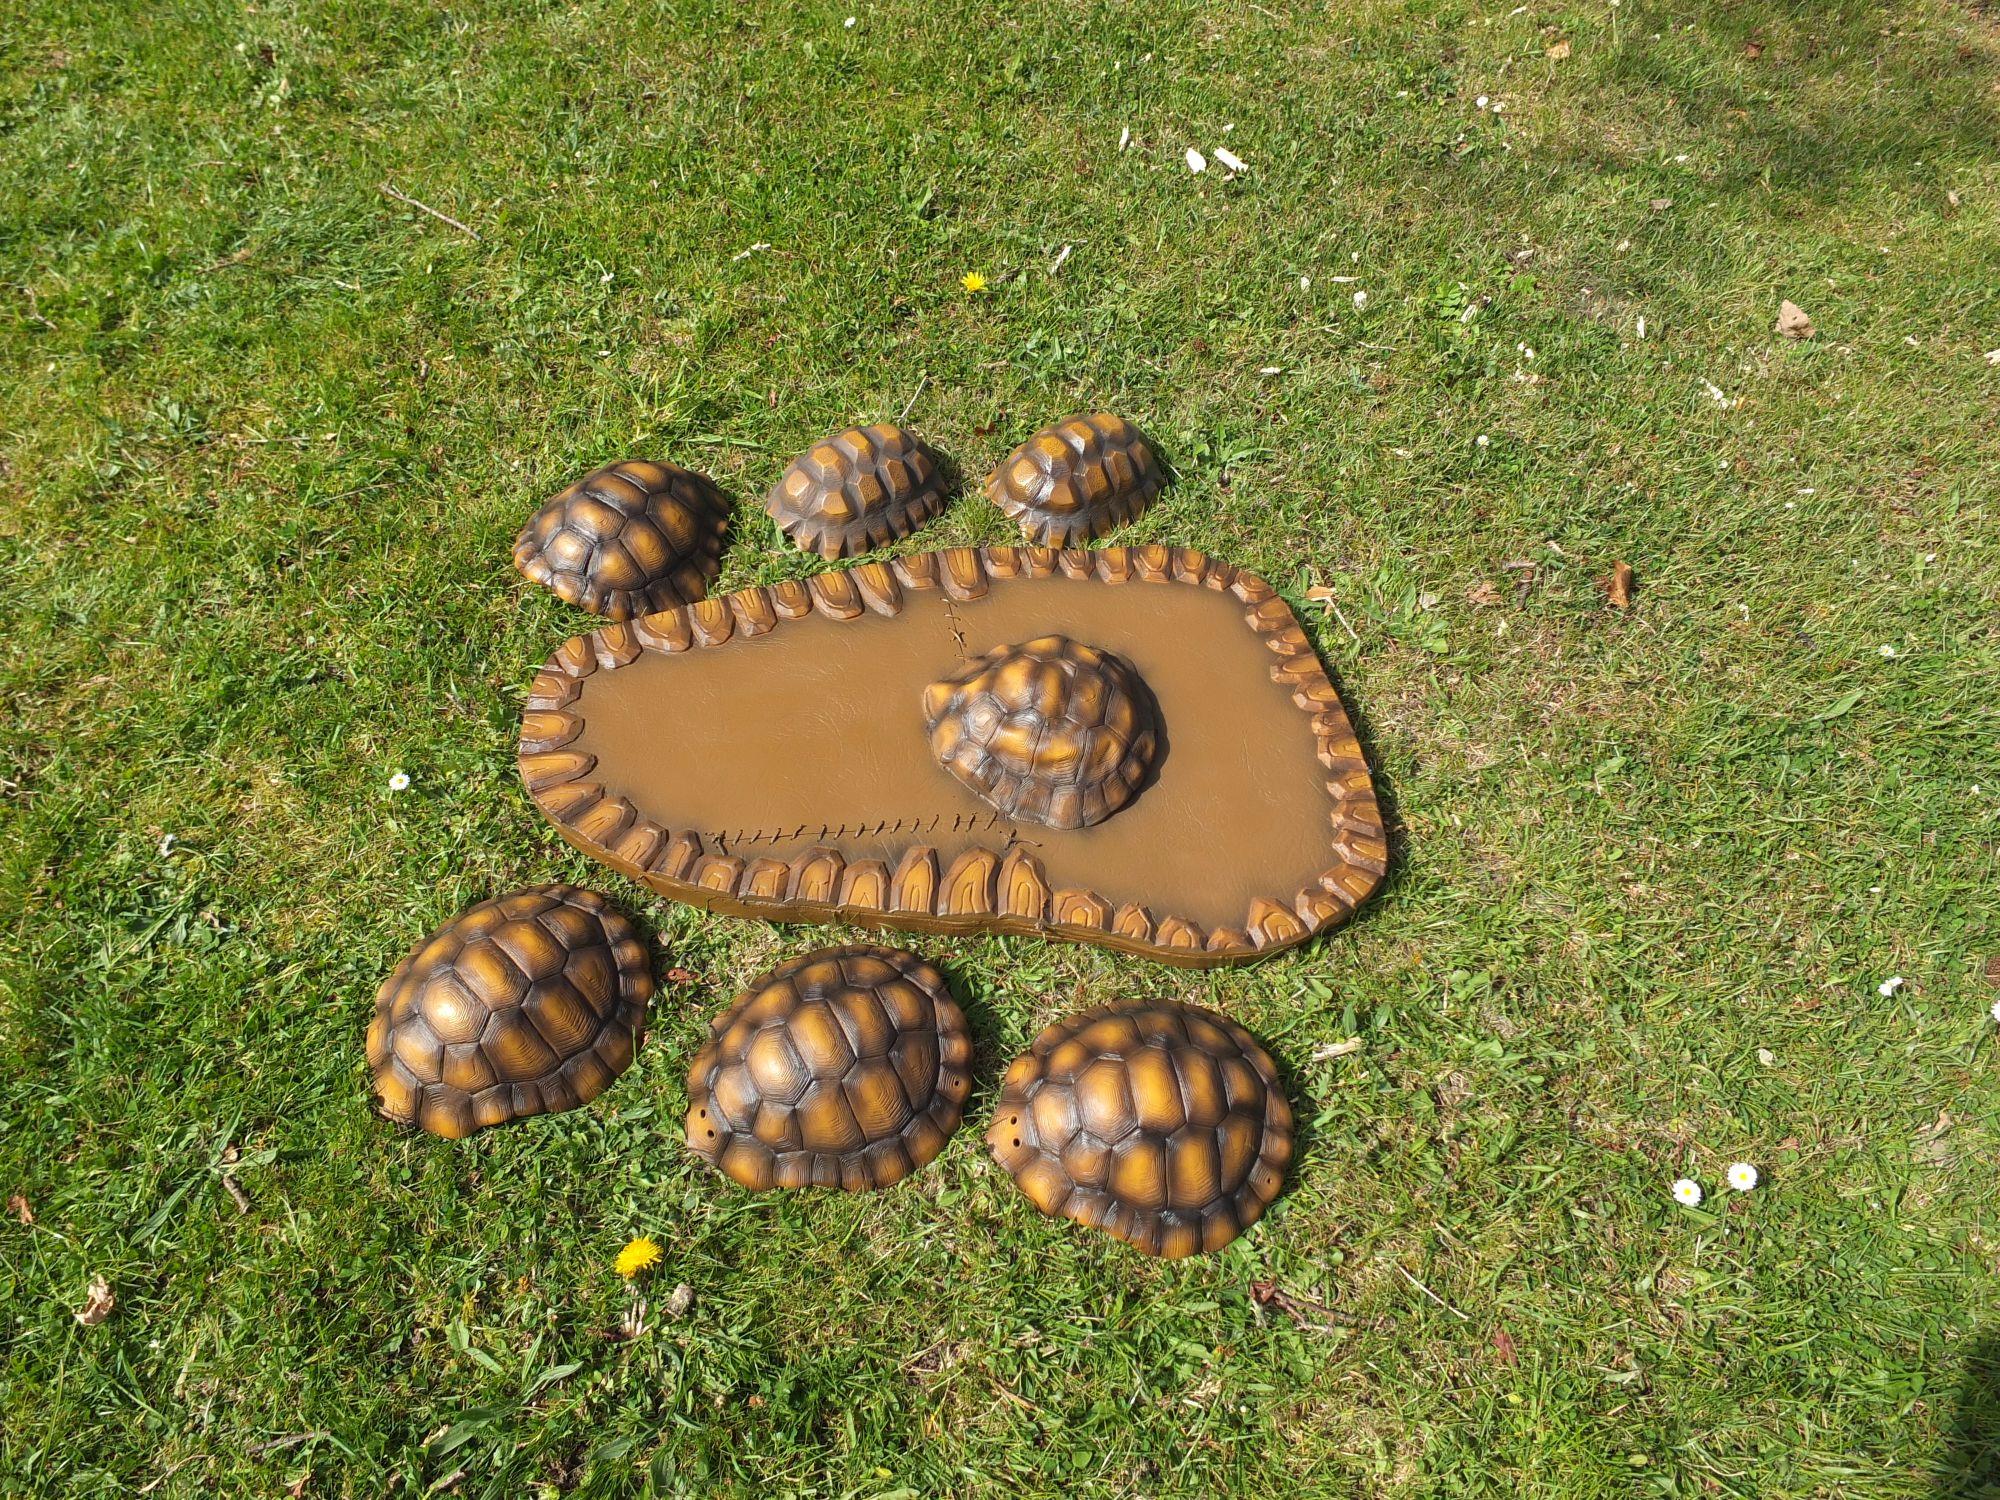 Tortoise shield and friends..